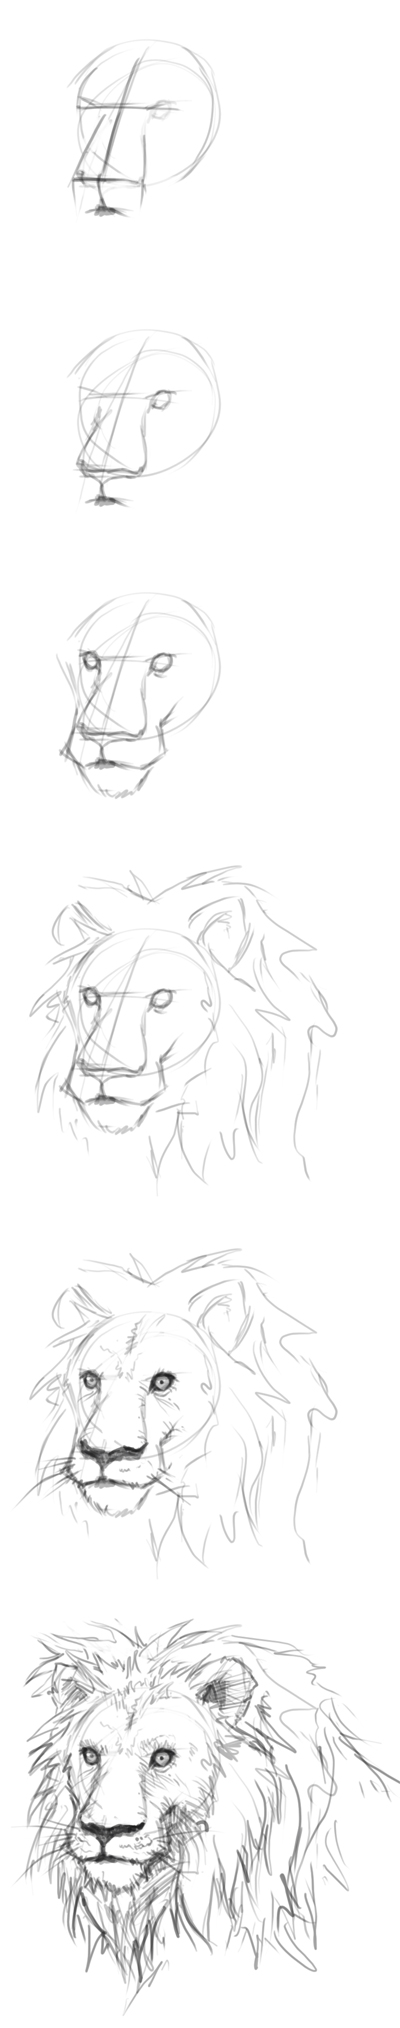 How to draw lion | Digital painting and drawing video tutorials 